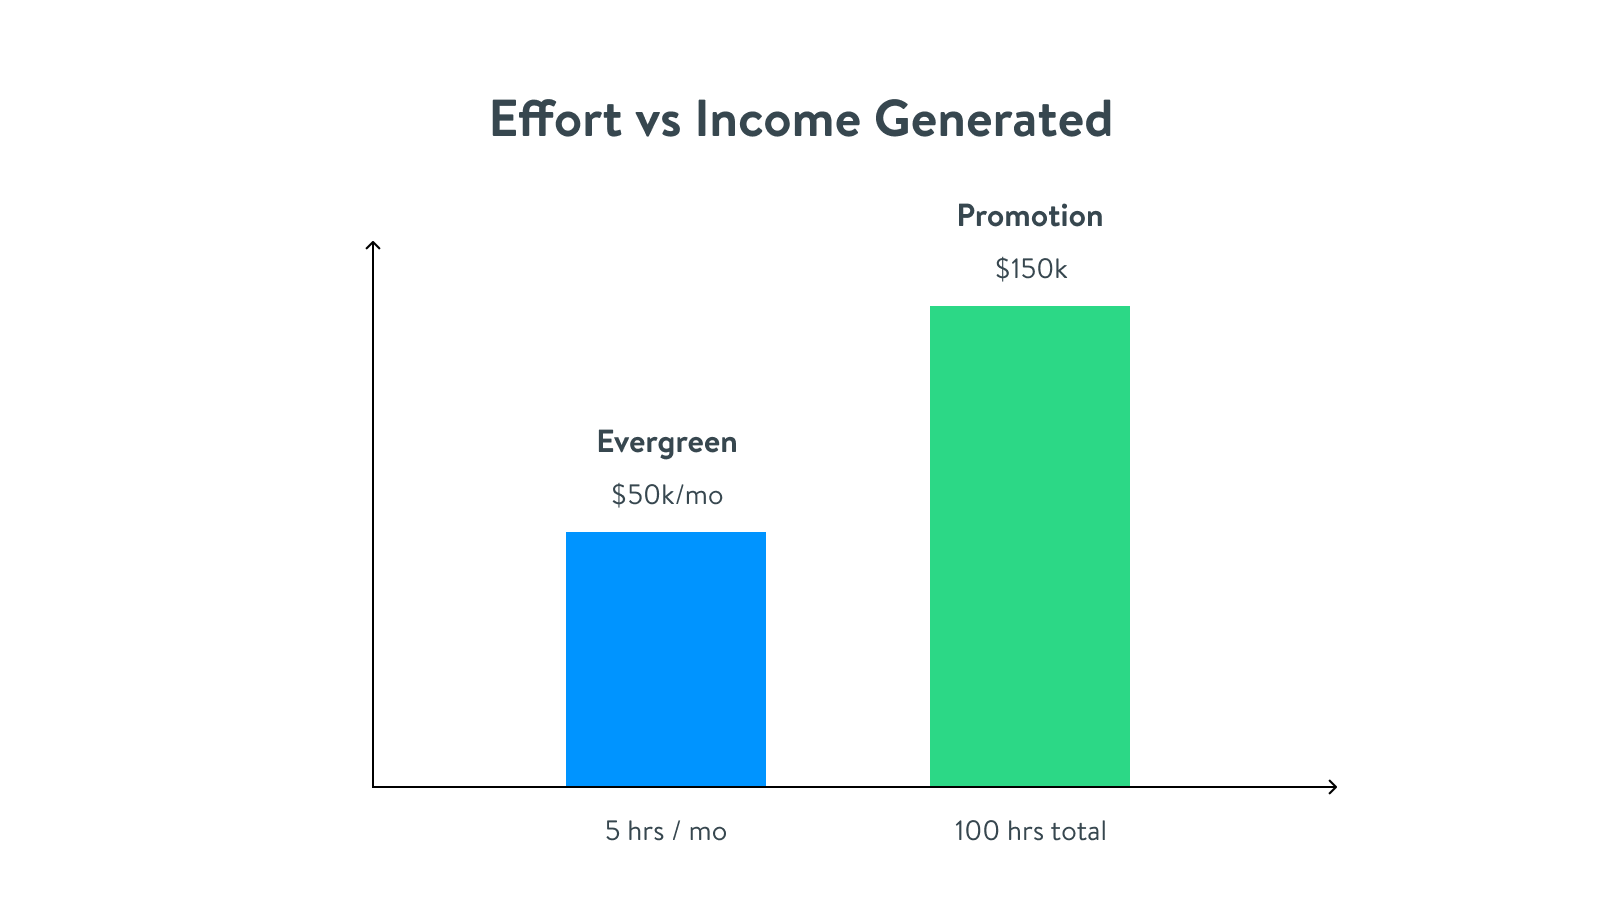 Effort vs Income Generated: Evergreen $50K/month (5 hours/month) vs Promotion $150K (100 hours total)